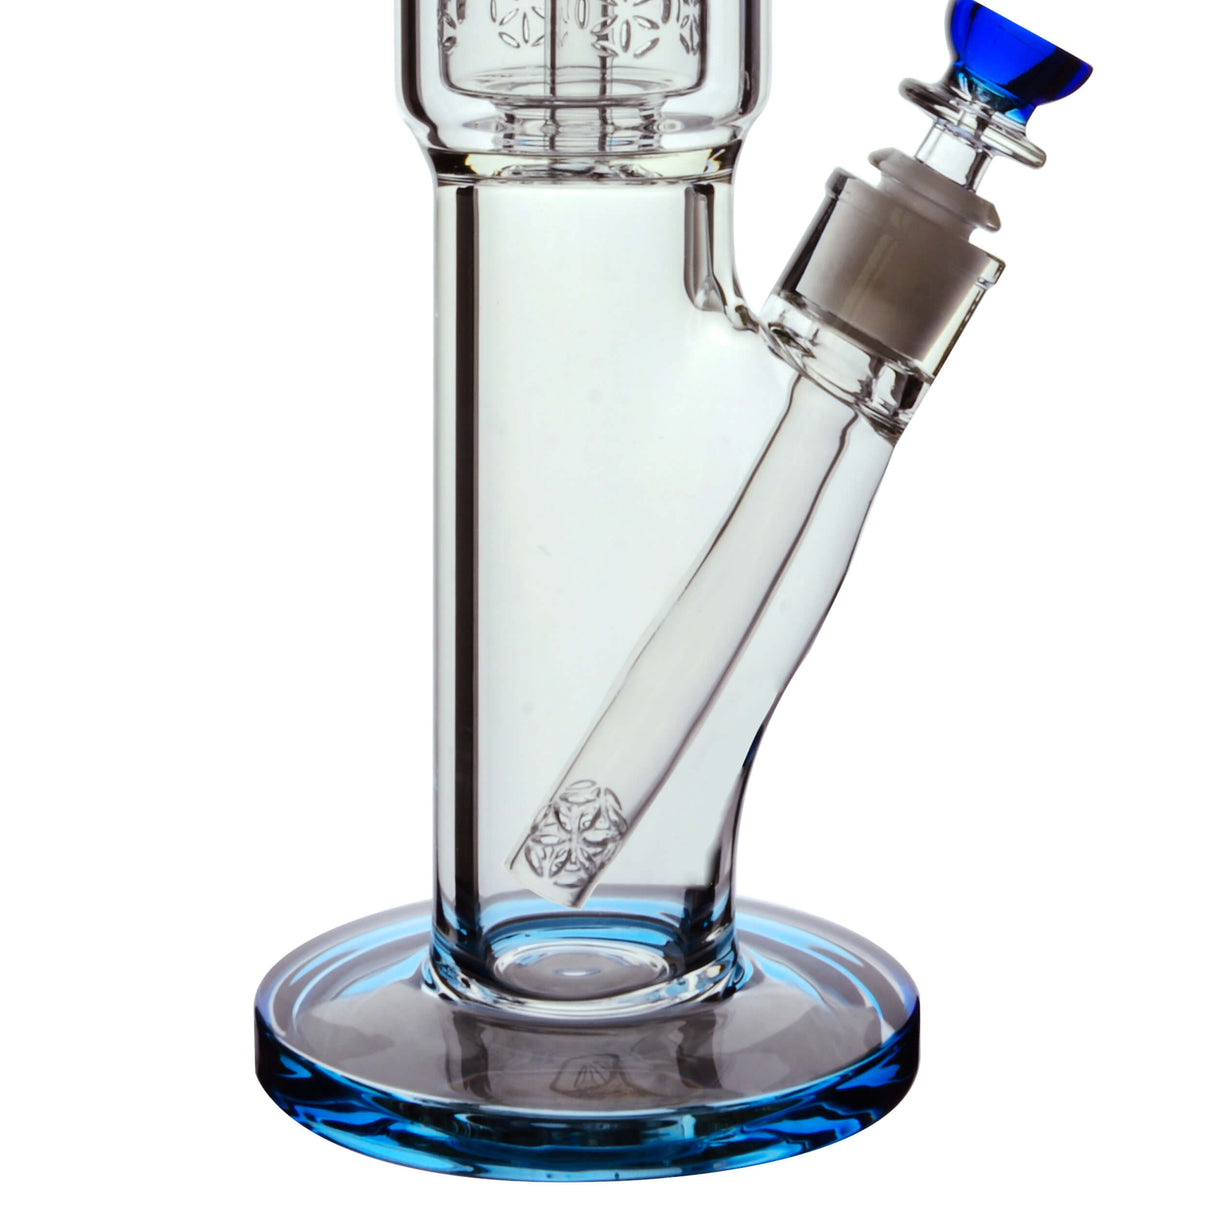 Calibear Sol Straight Tube Bong in Borosilicate Glass with Blue Accents - Side View